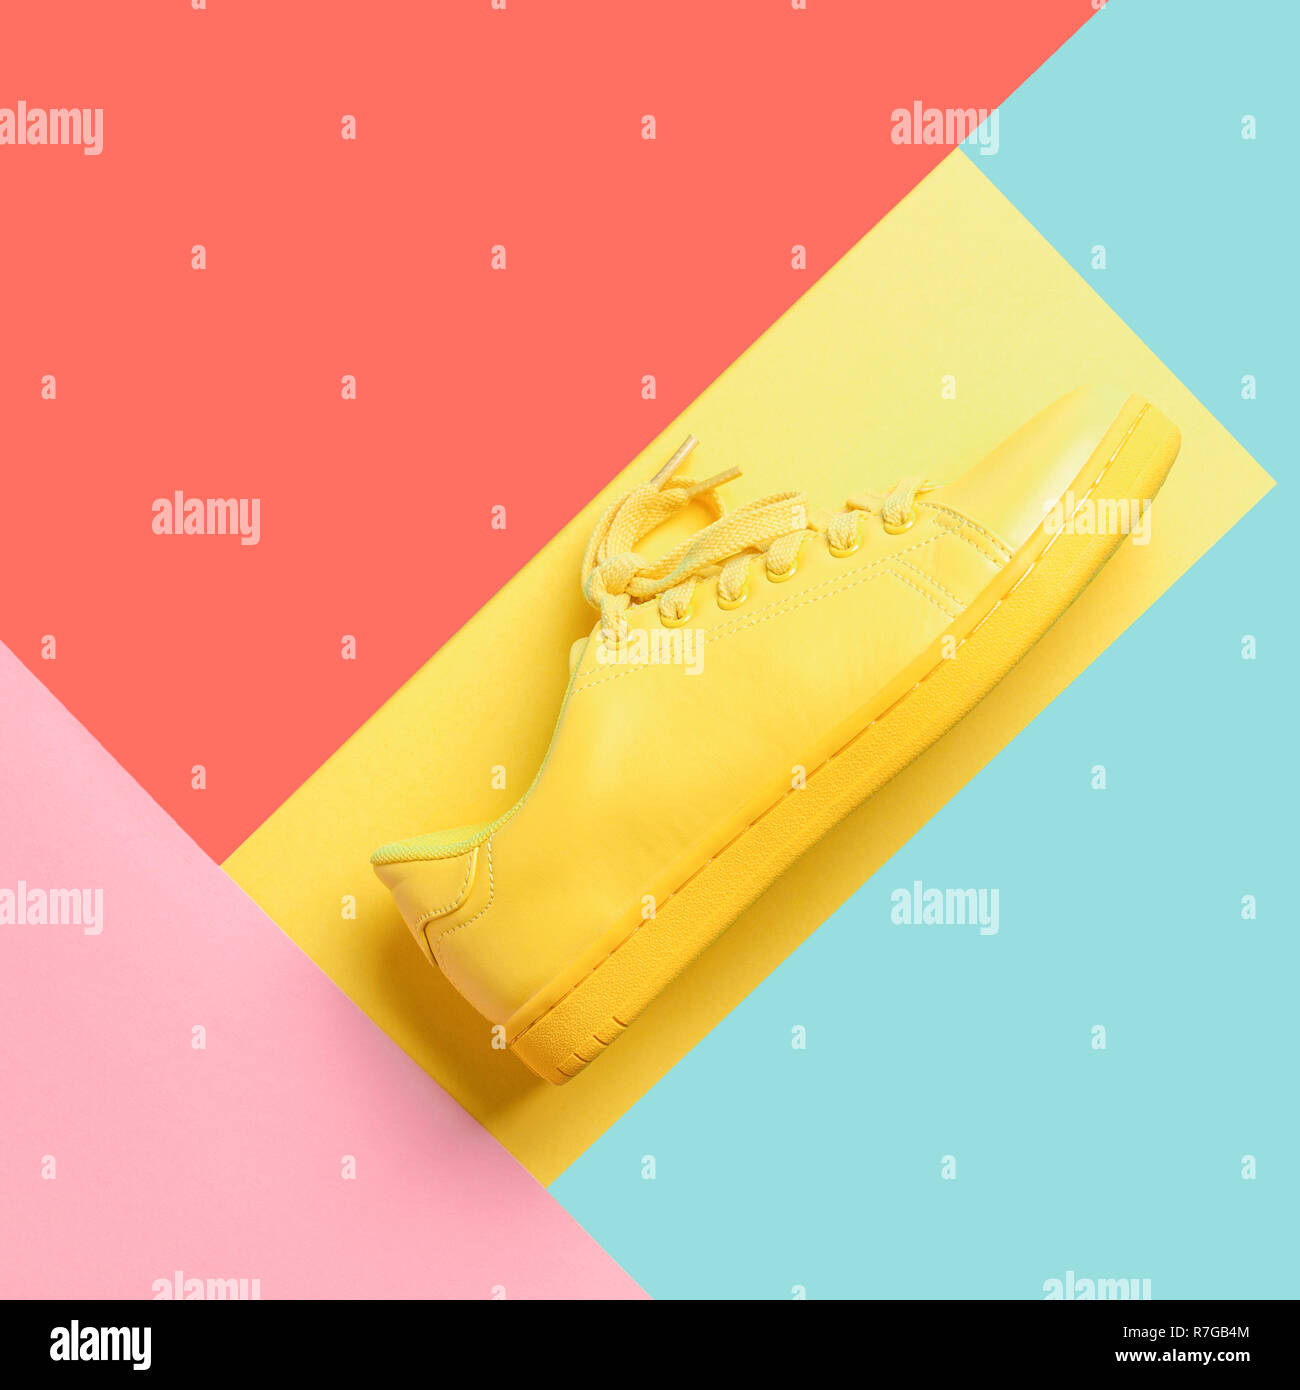 Conceptual geometric image with yellow shoe on multicolored background. Trendy colors of 2019: Living Coral, Limpet Shell, Vibrant Yellow and Sea Pink Stock Photo